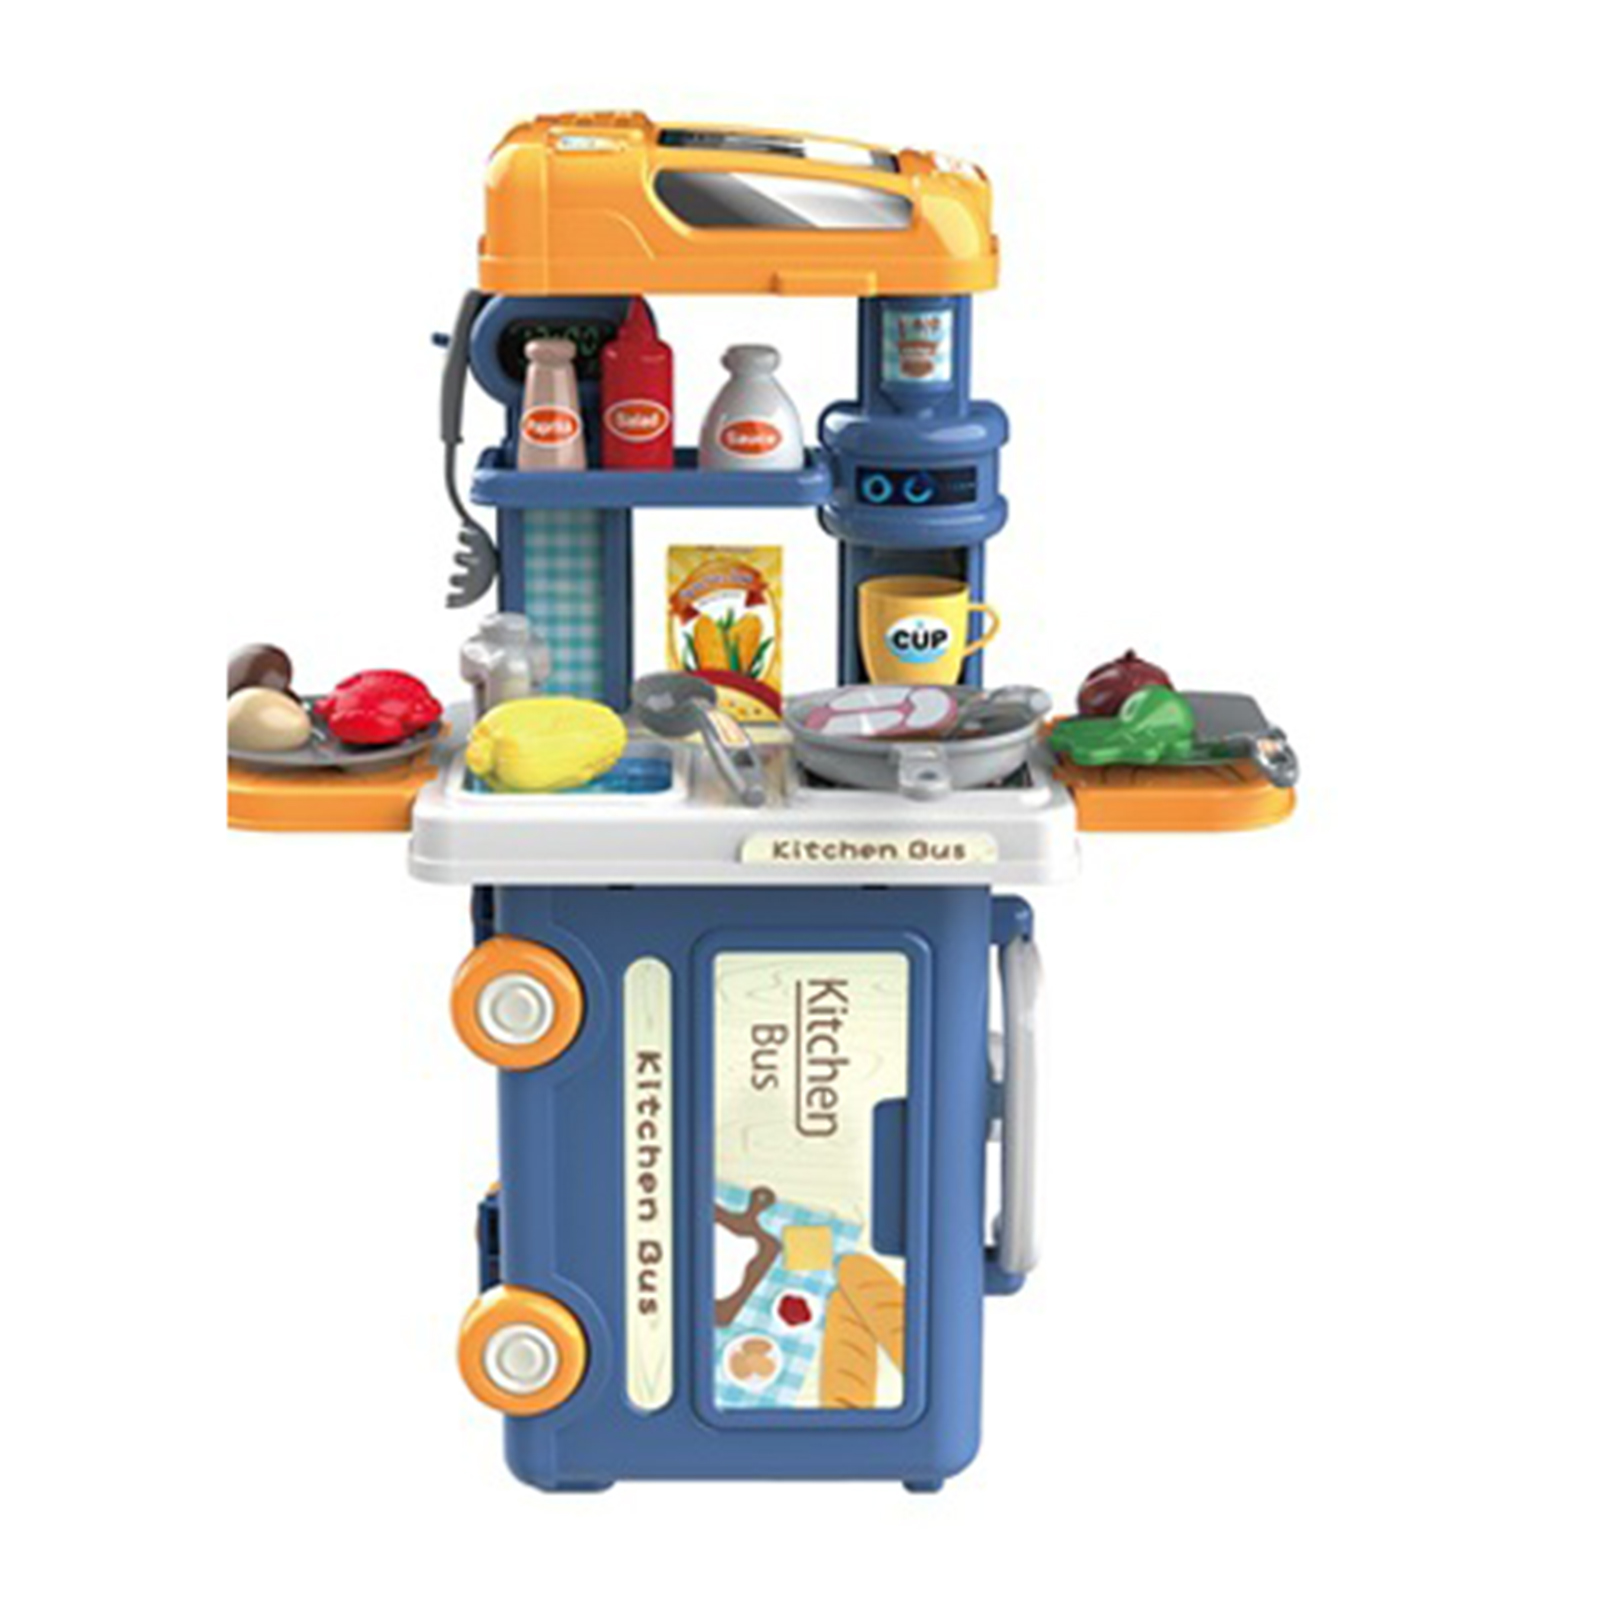 3-in-1 Children Bus Pretend Play Playset Simulation Doctor Kitchen Supermarket Makeup Kit Educational Toy For Kids Xmas Gifts